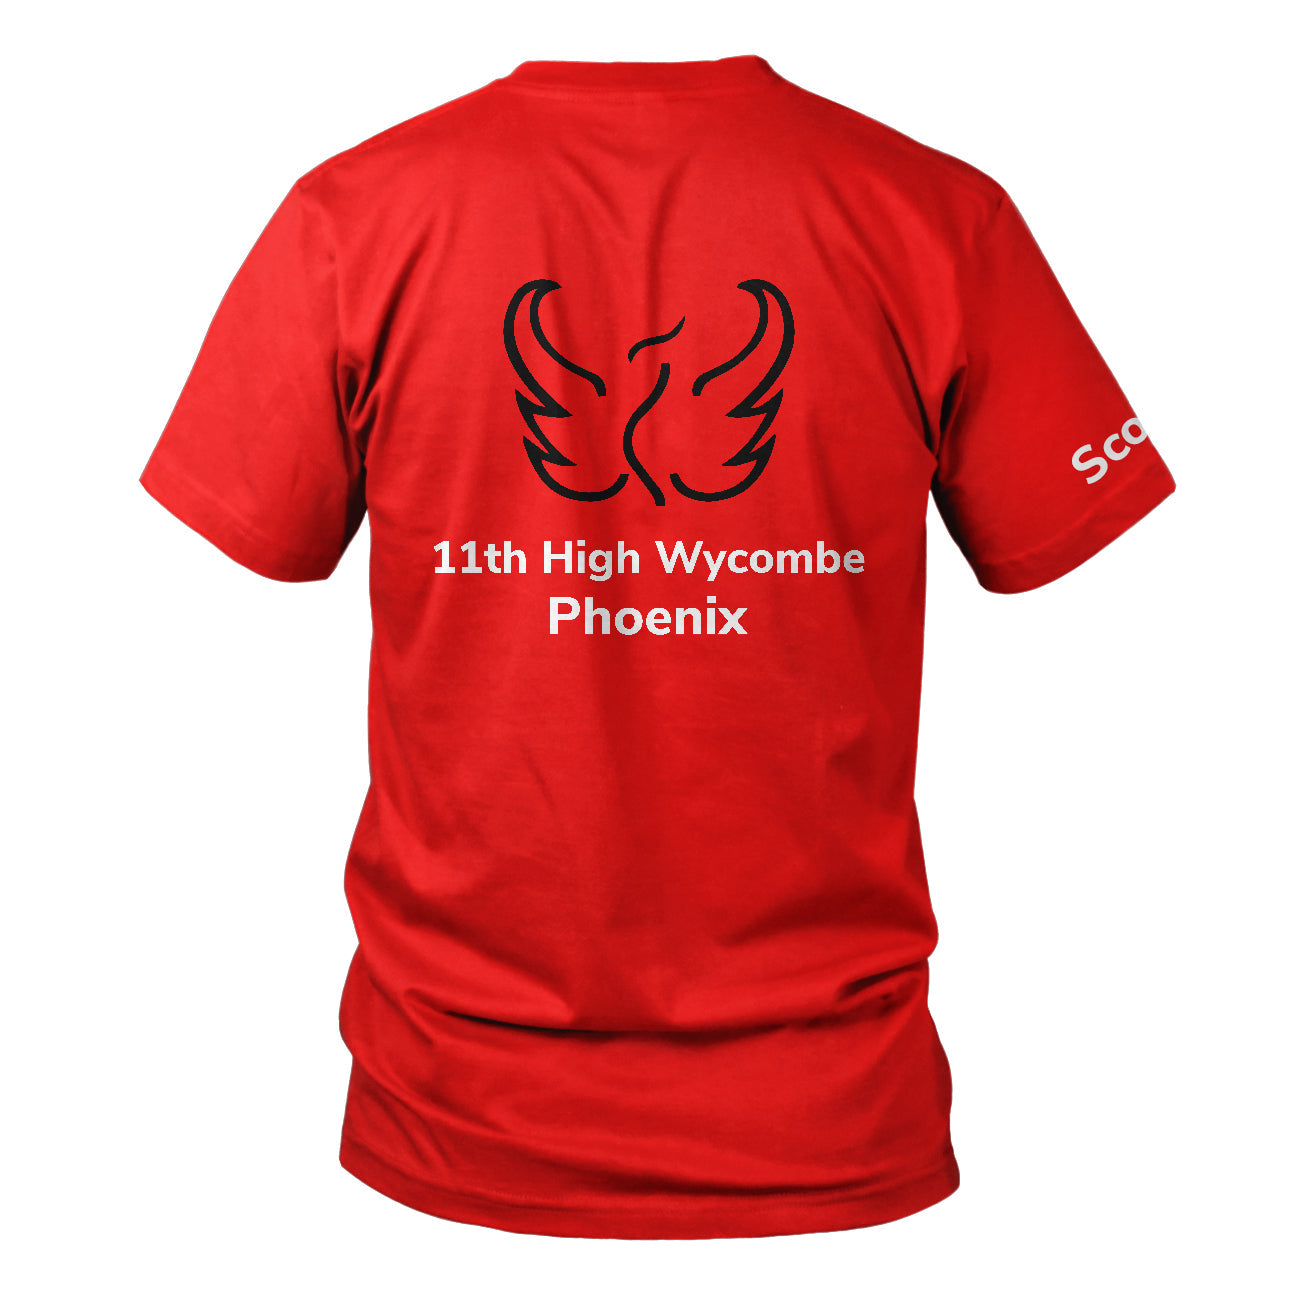 11th High Wycombe Phoenix Red Kids T-Shirt Scouts